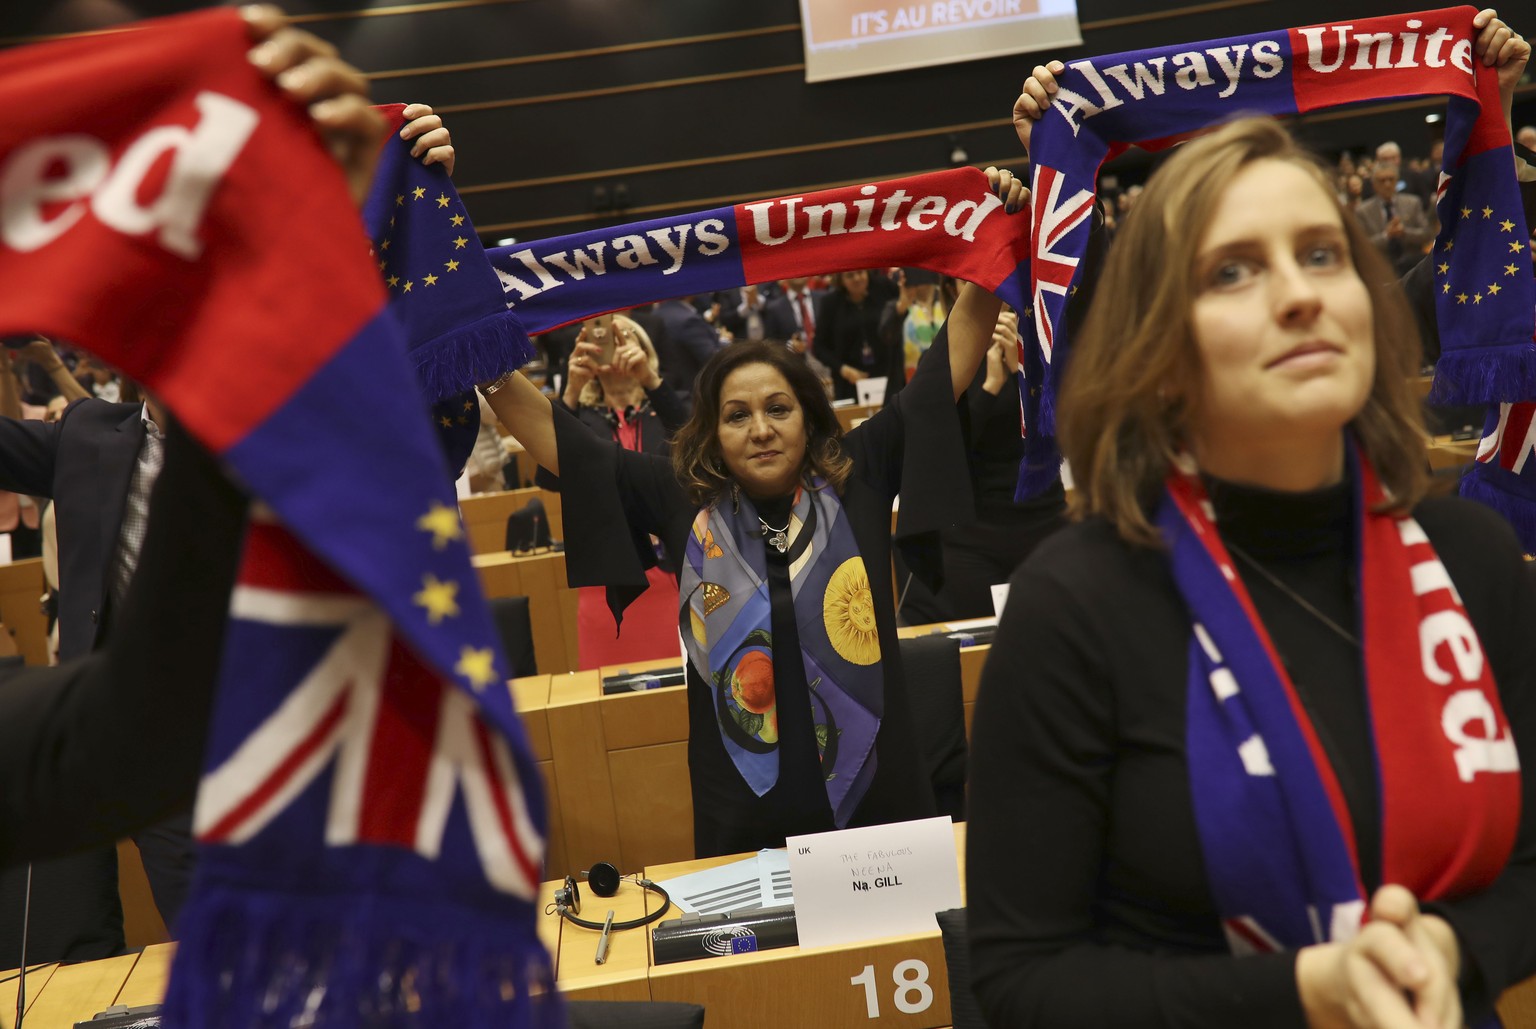 British MEP&#039;s hold up scarves during a ceremony prior to the vote on the UK&#039;s withdrawal from the EU, the final legislative step in the Brexit proceedings, at the European Parliament in Brus ...